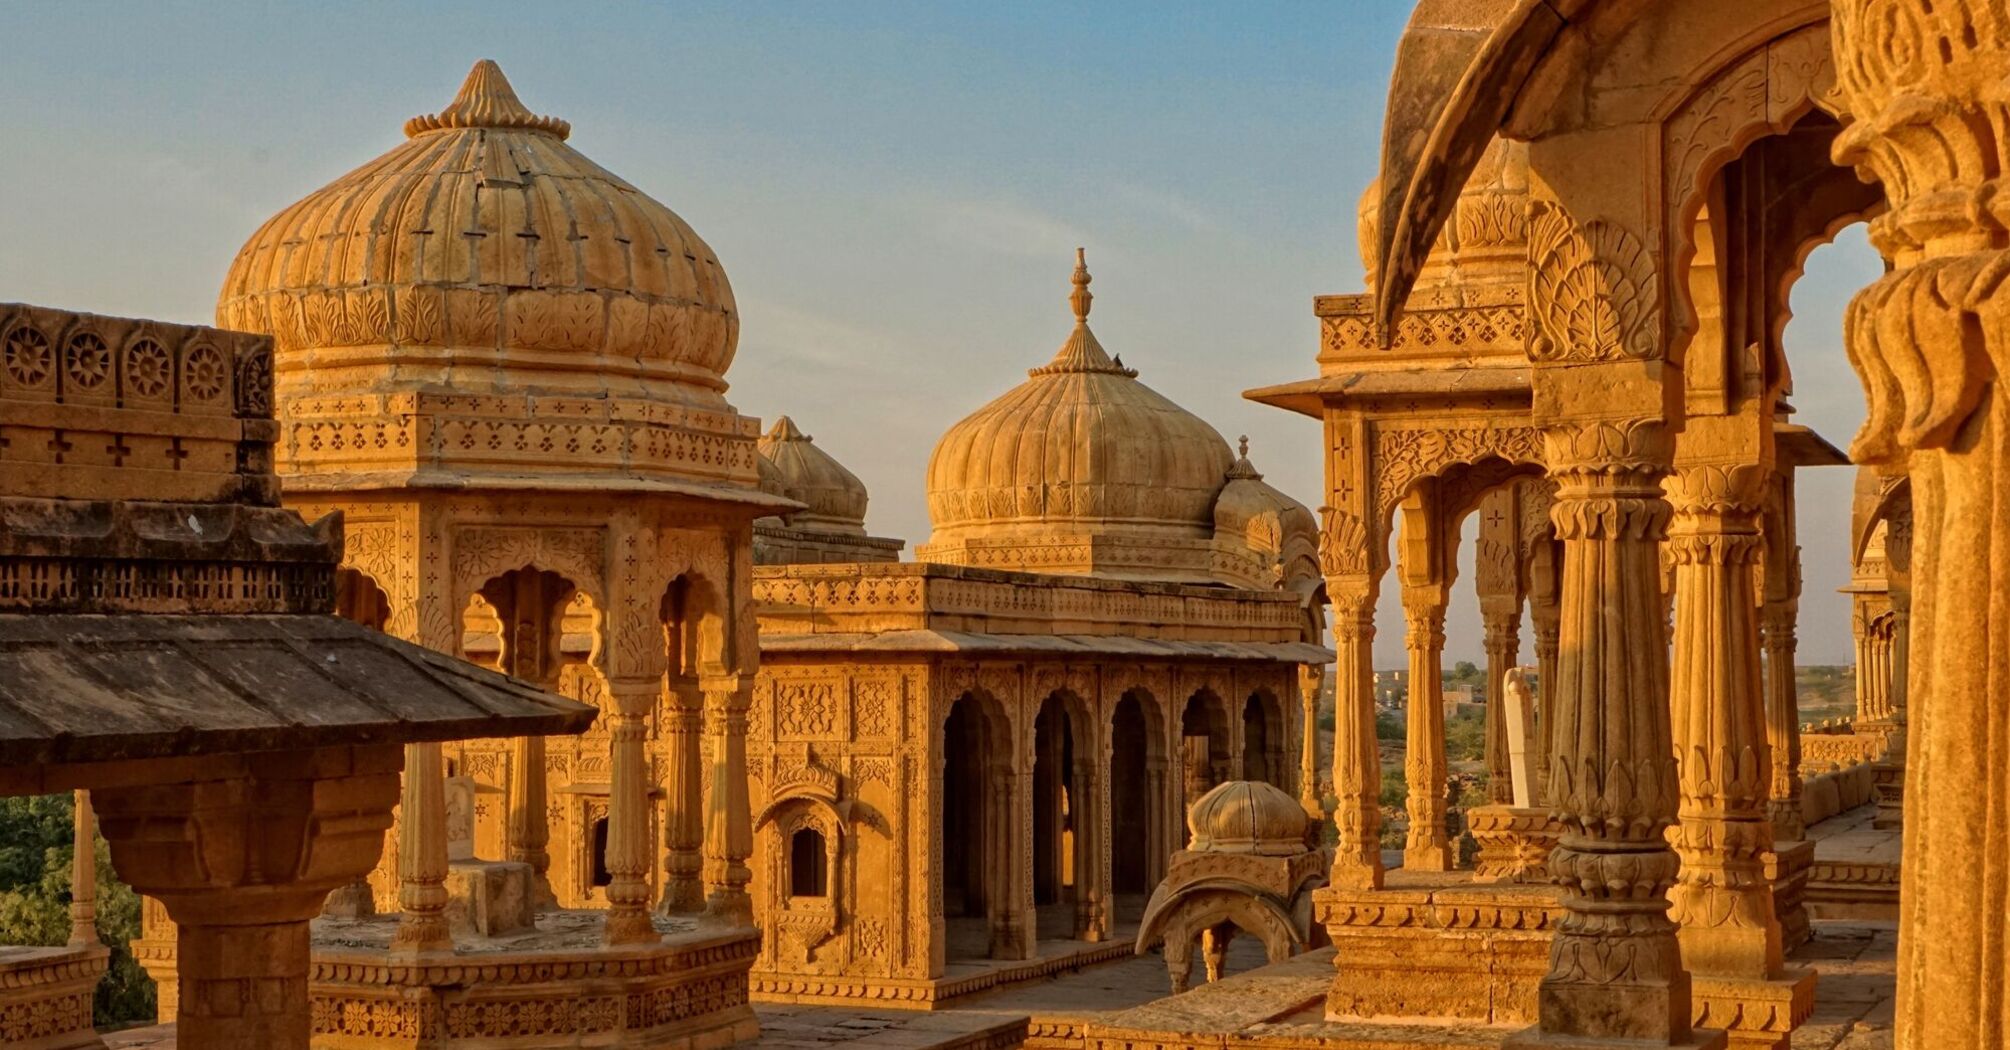 What ancient cities should tourists visit in India